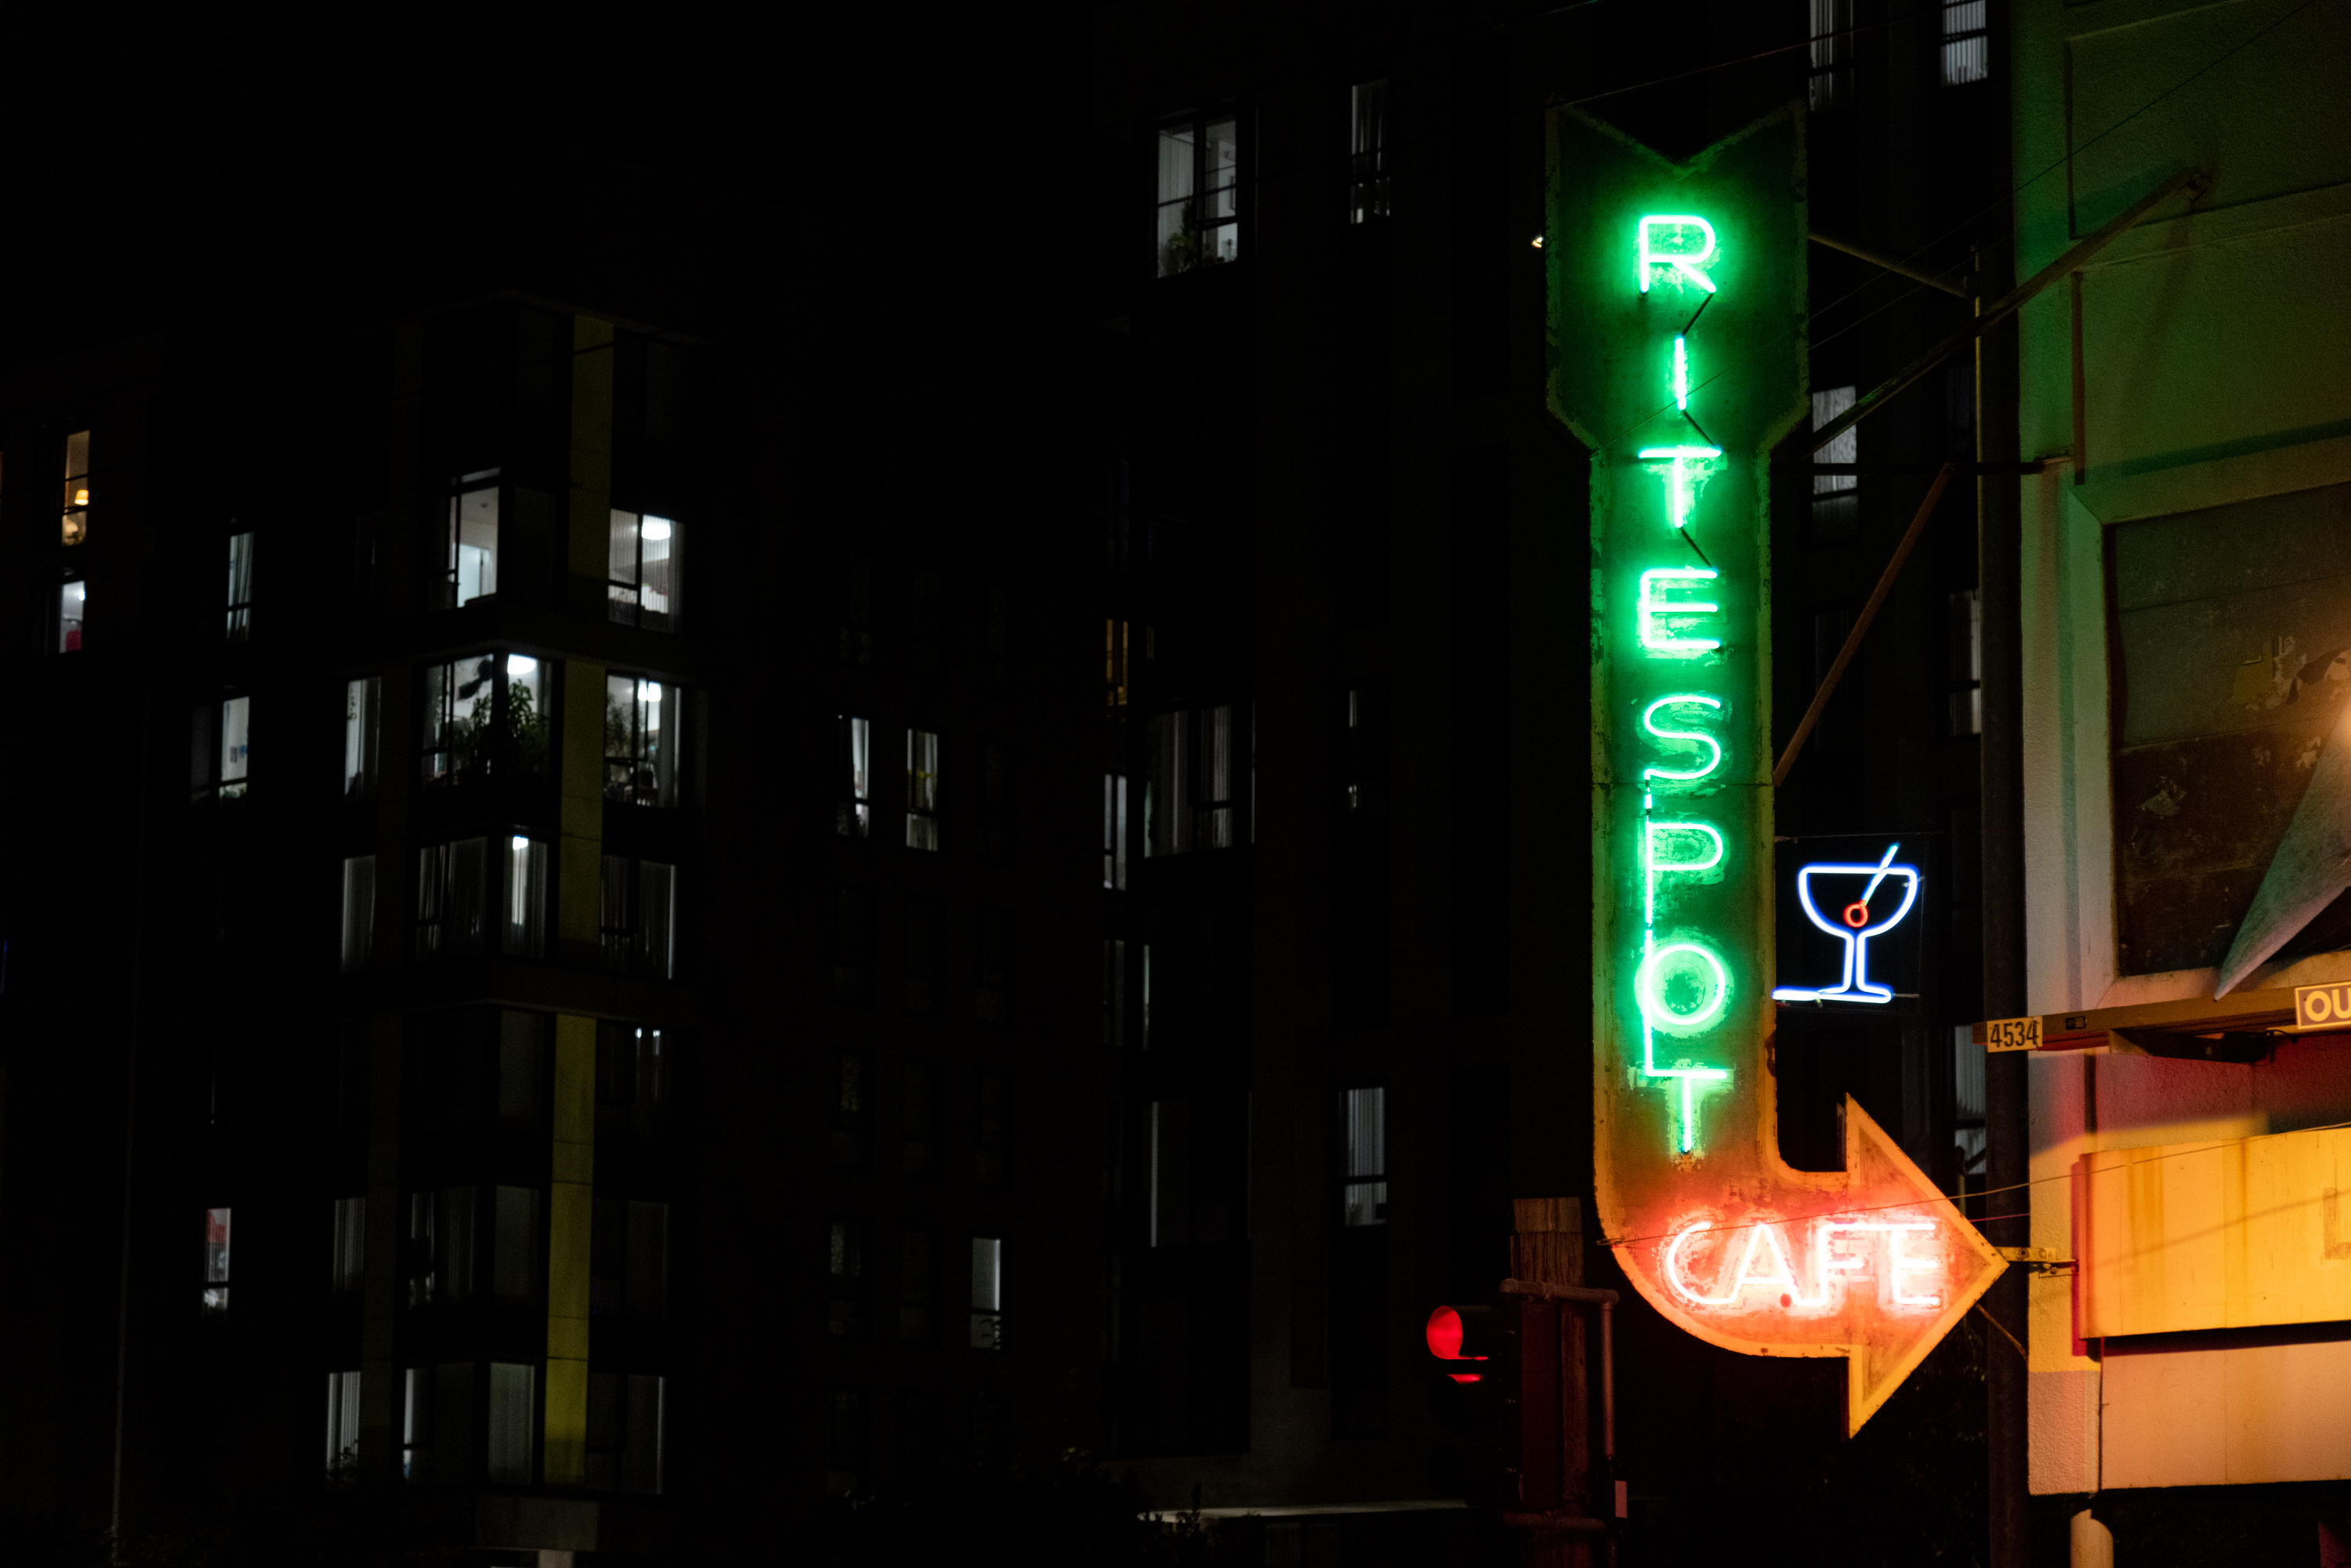 A green neon sign at night that reads &quot;RITESPOT CAFE&quot; in the shape of an arrow pointing downwards and turning right